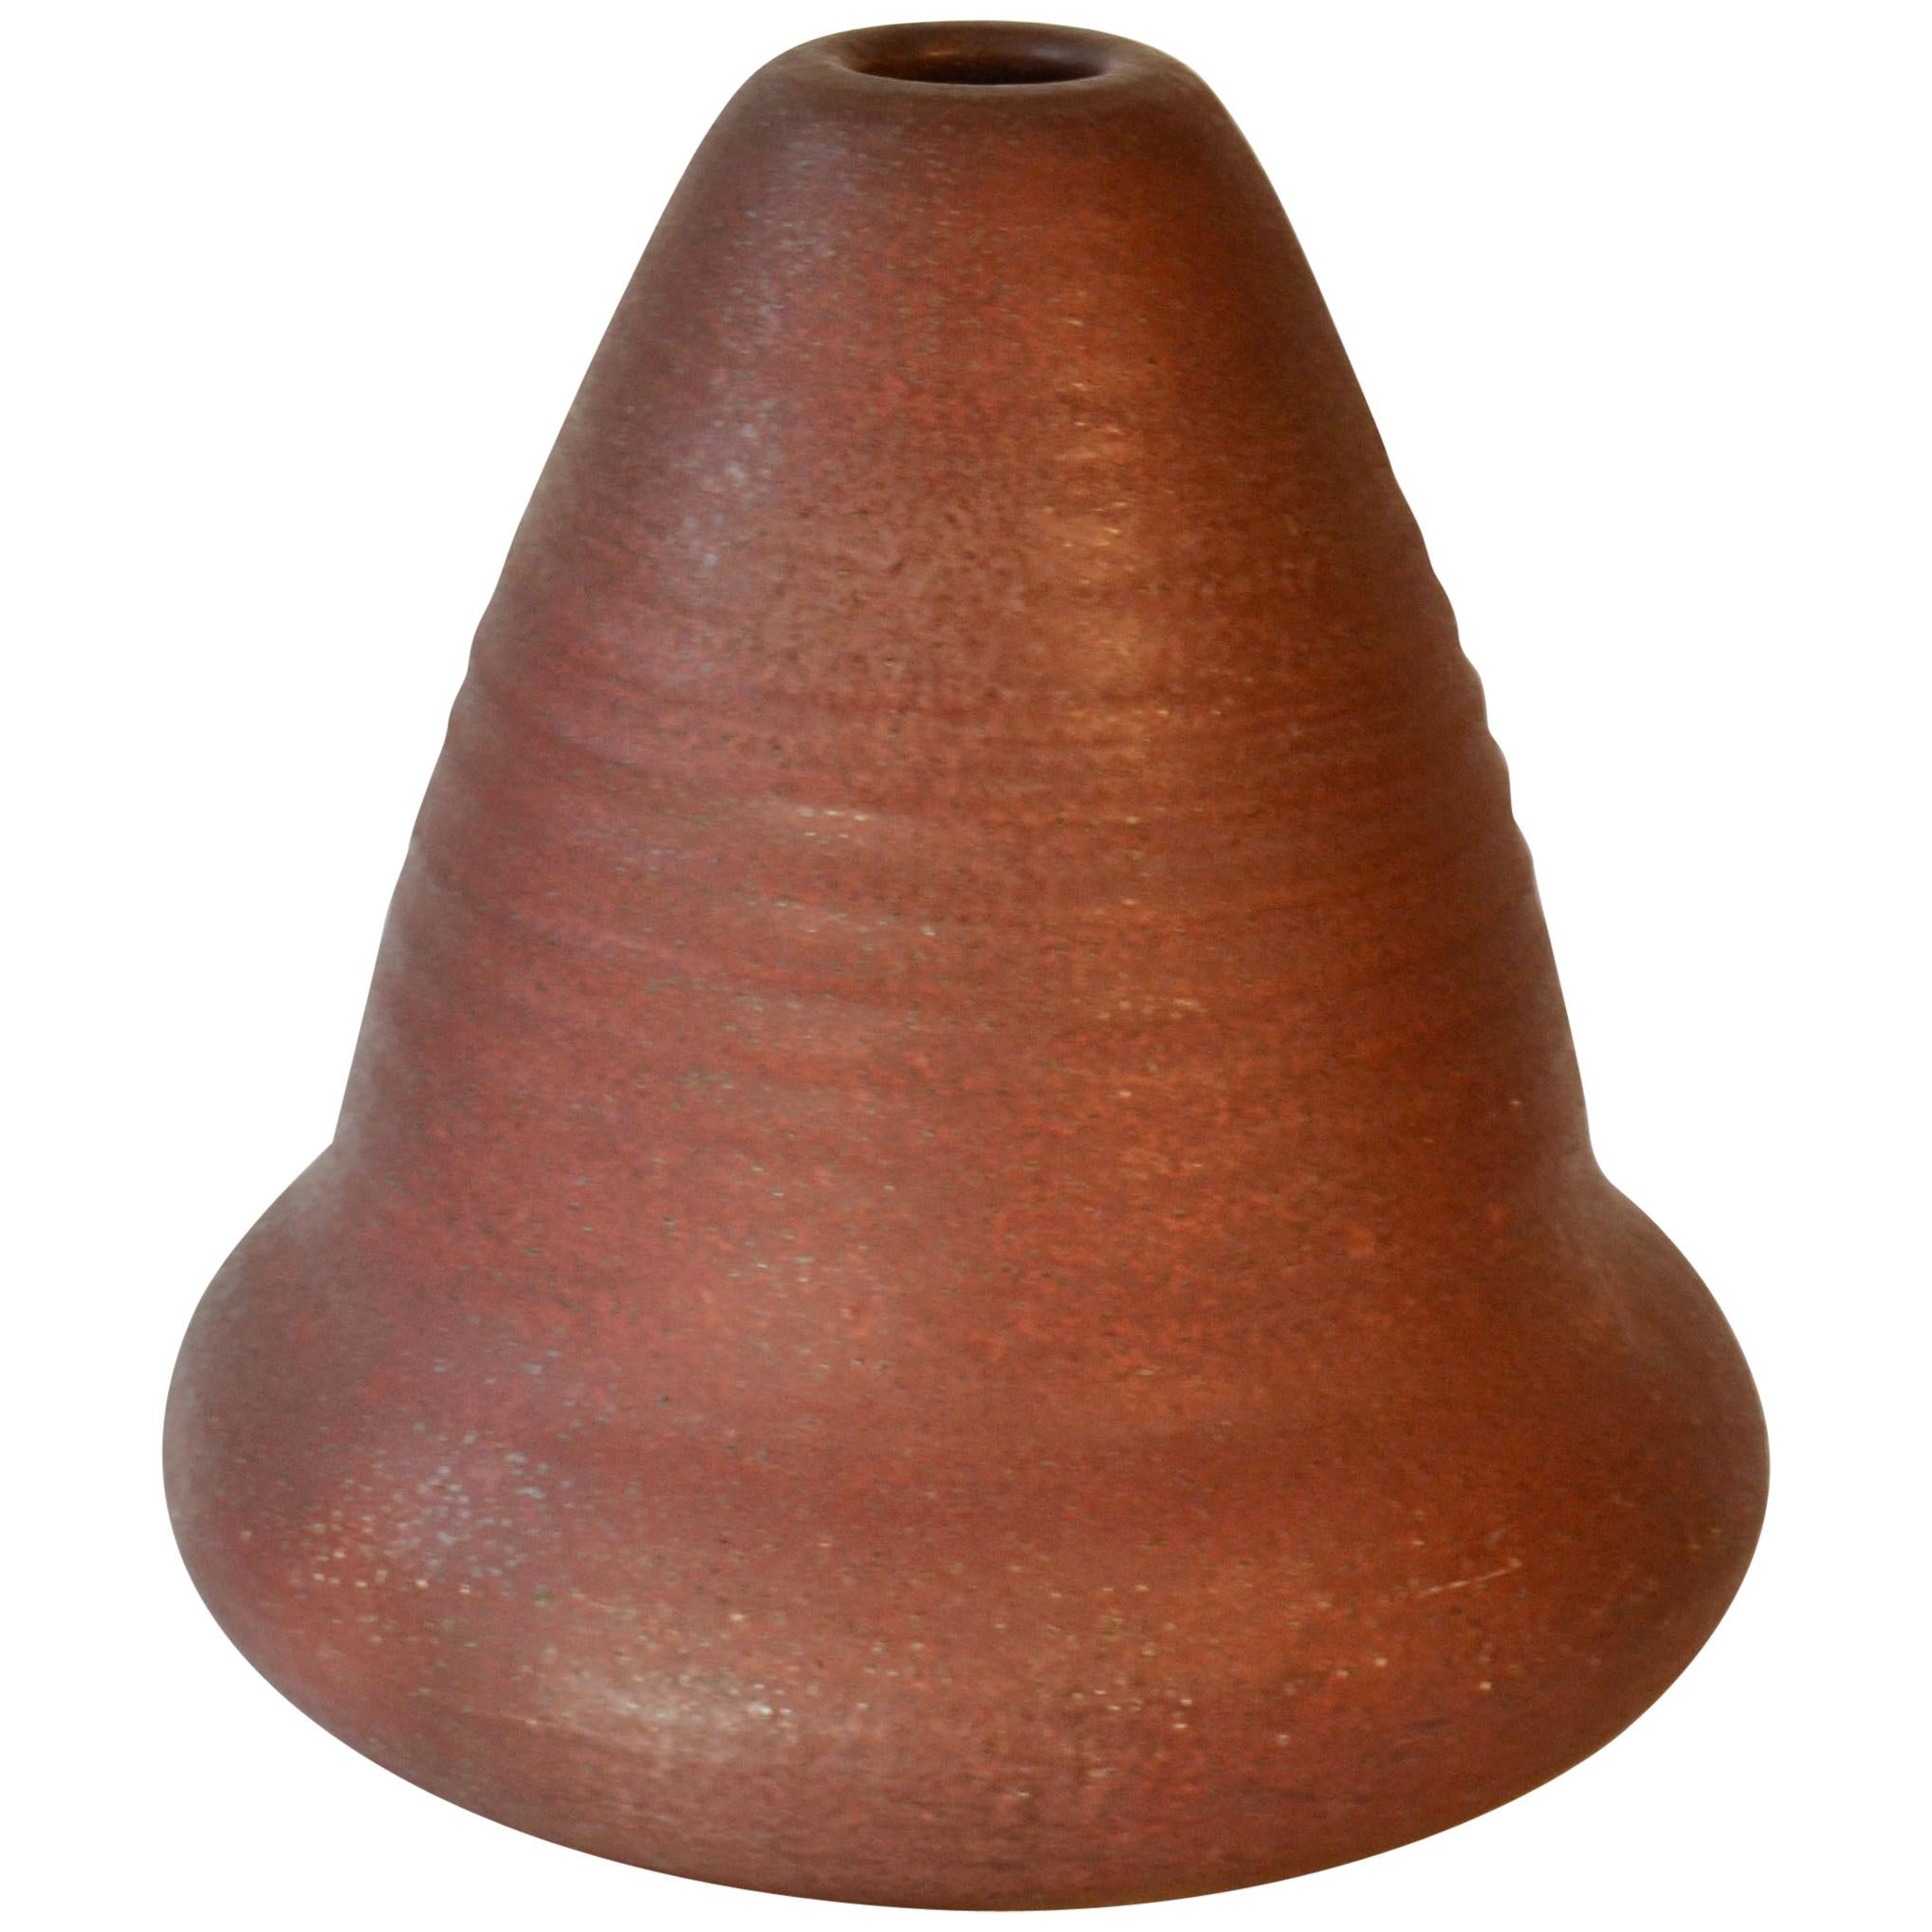 Sculptural Studio Pottery Vase with Red Earth Tones, Dutch  1960's